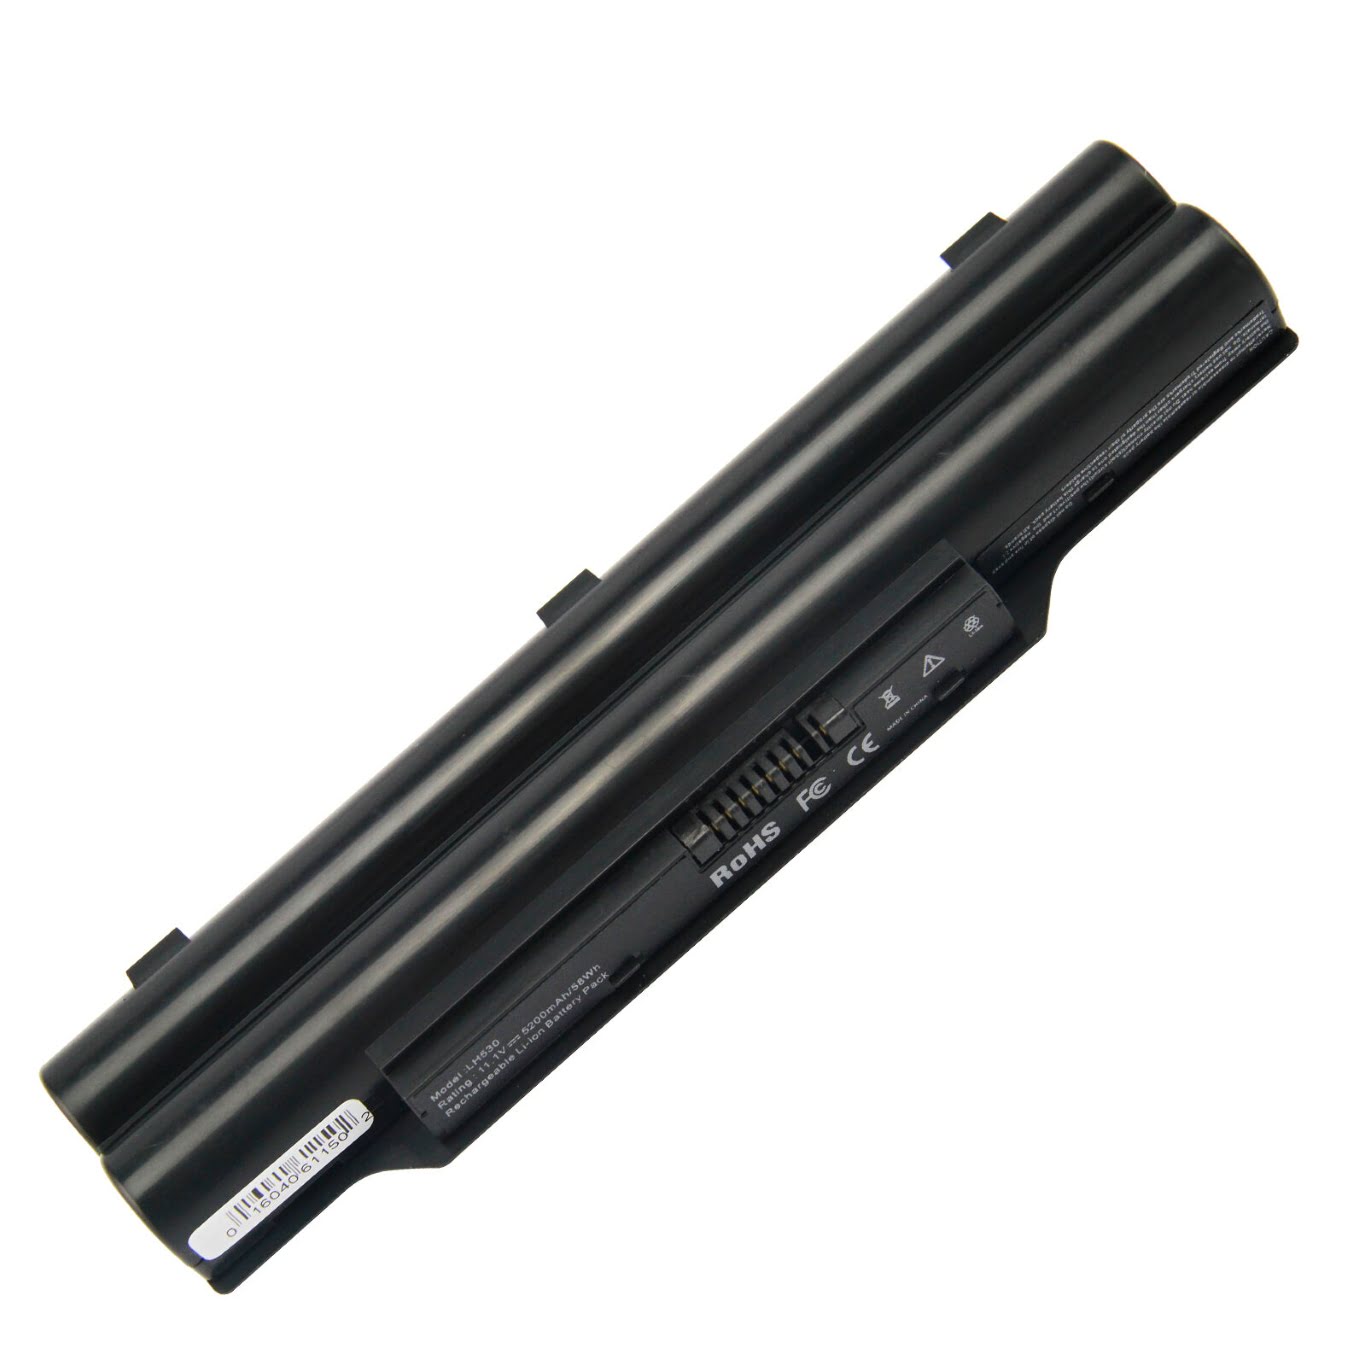 CP477891-01, CP477891-03 replacement Laptop Battery for Fujitsu LifeBook A530, LifeBook A531, 6 cells, 10.8V, 4400mAh